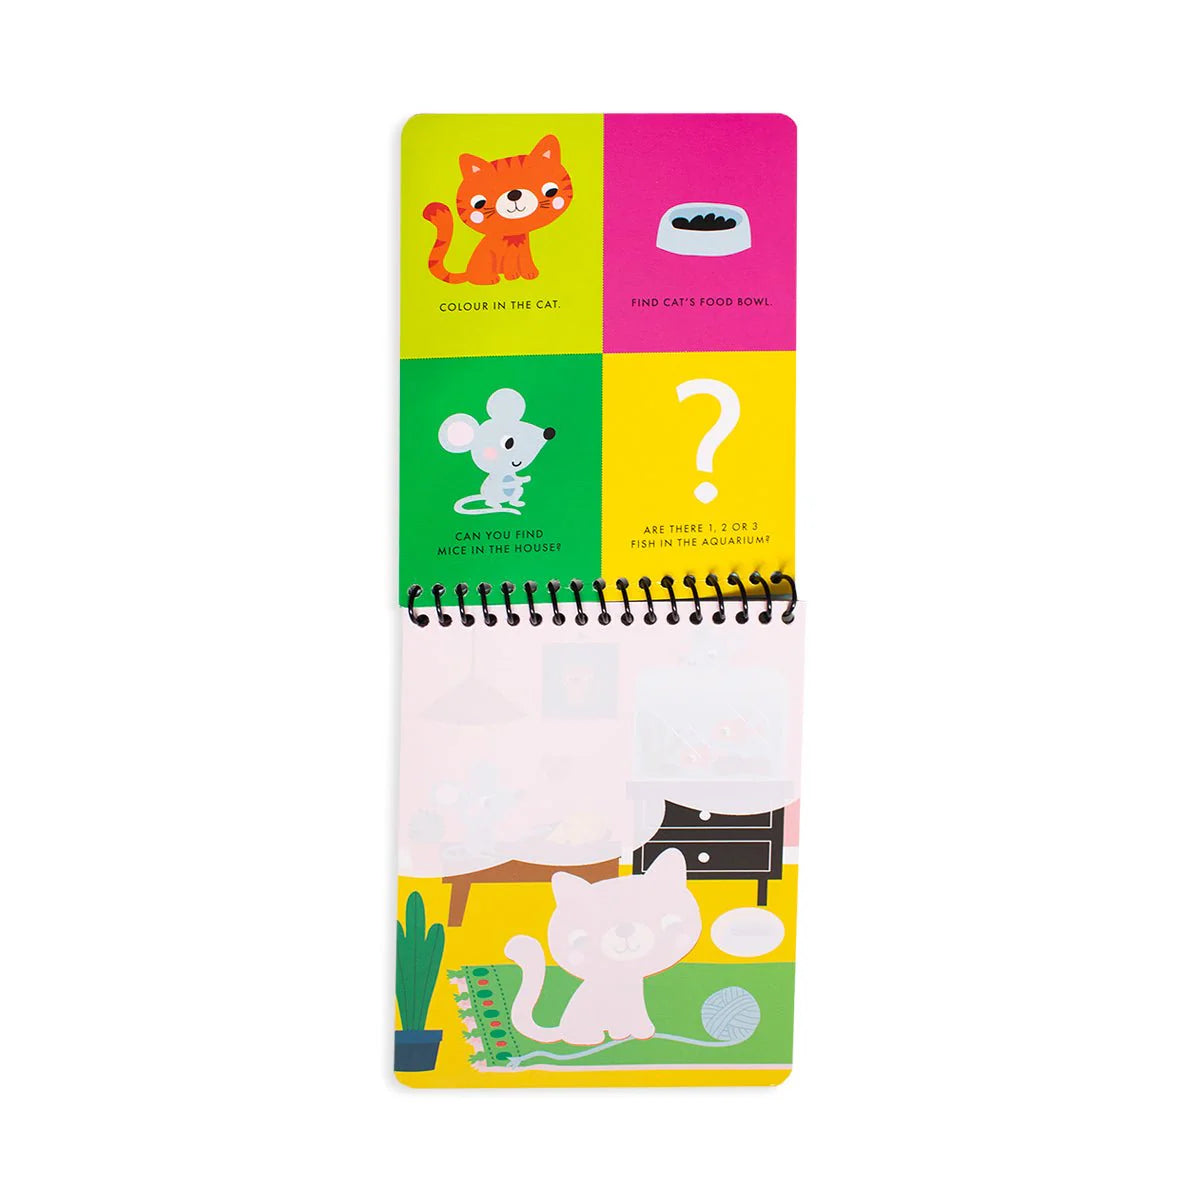 Colour with Water Pets Activity Pad